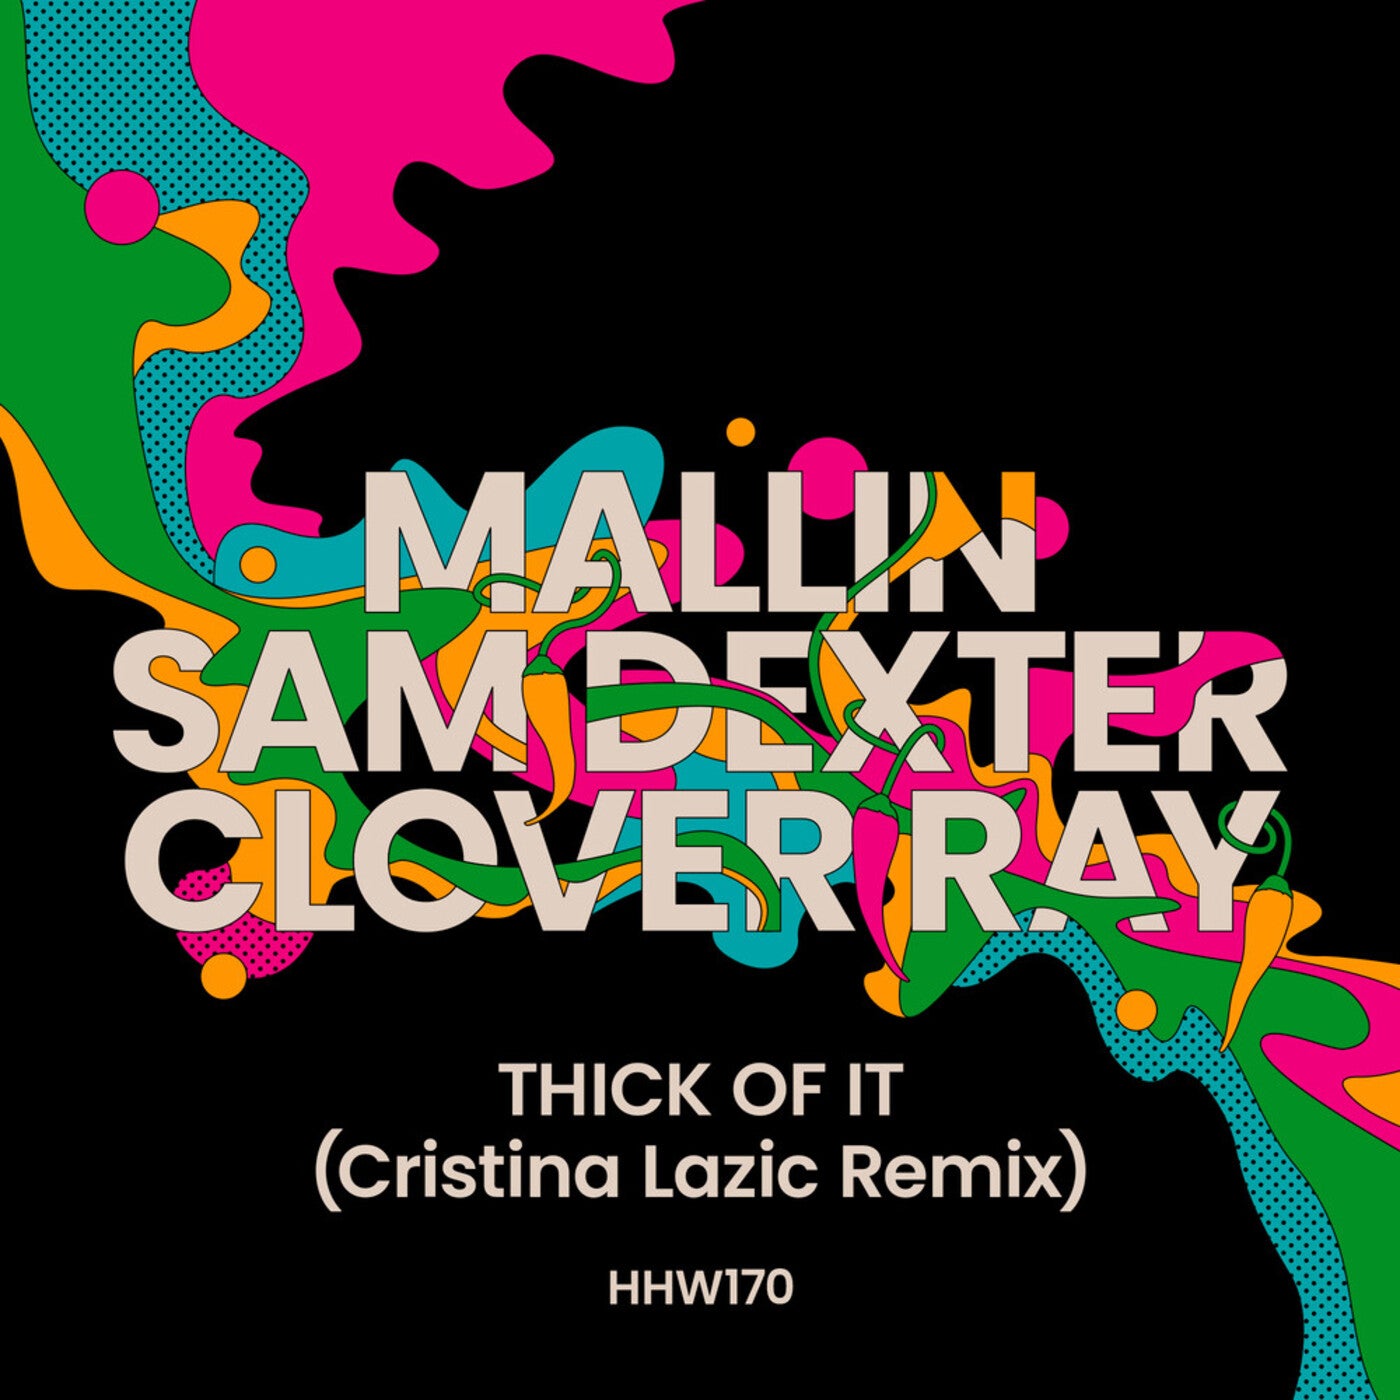 Clover Ray, Sam Dexter, Mallin - Thick Of It (Cristina Lazic Extended Remix)